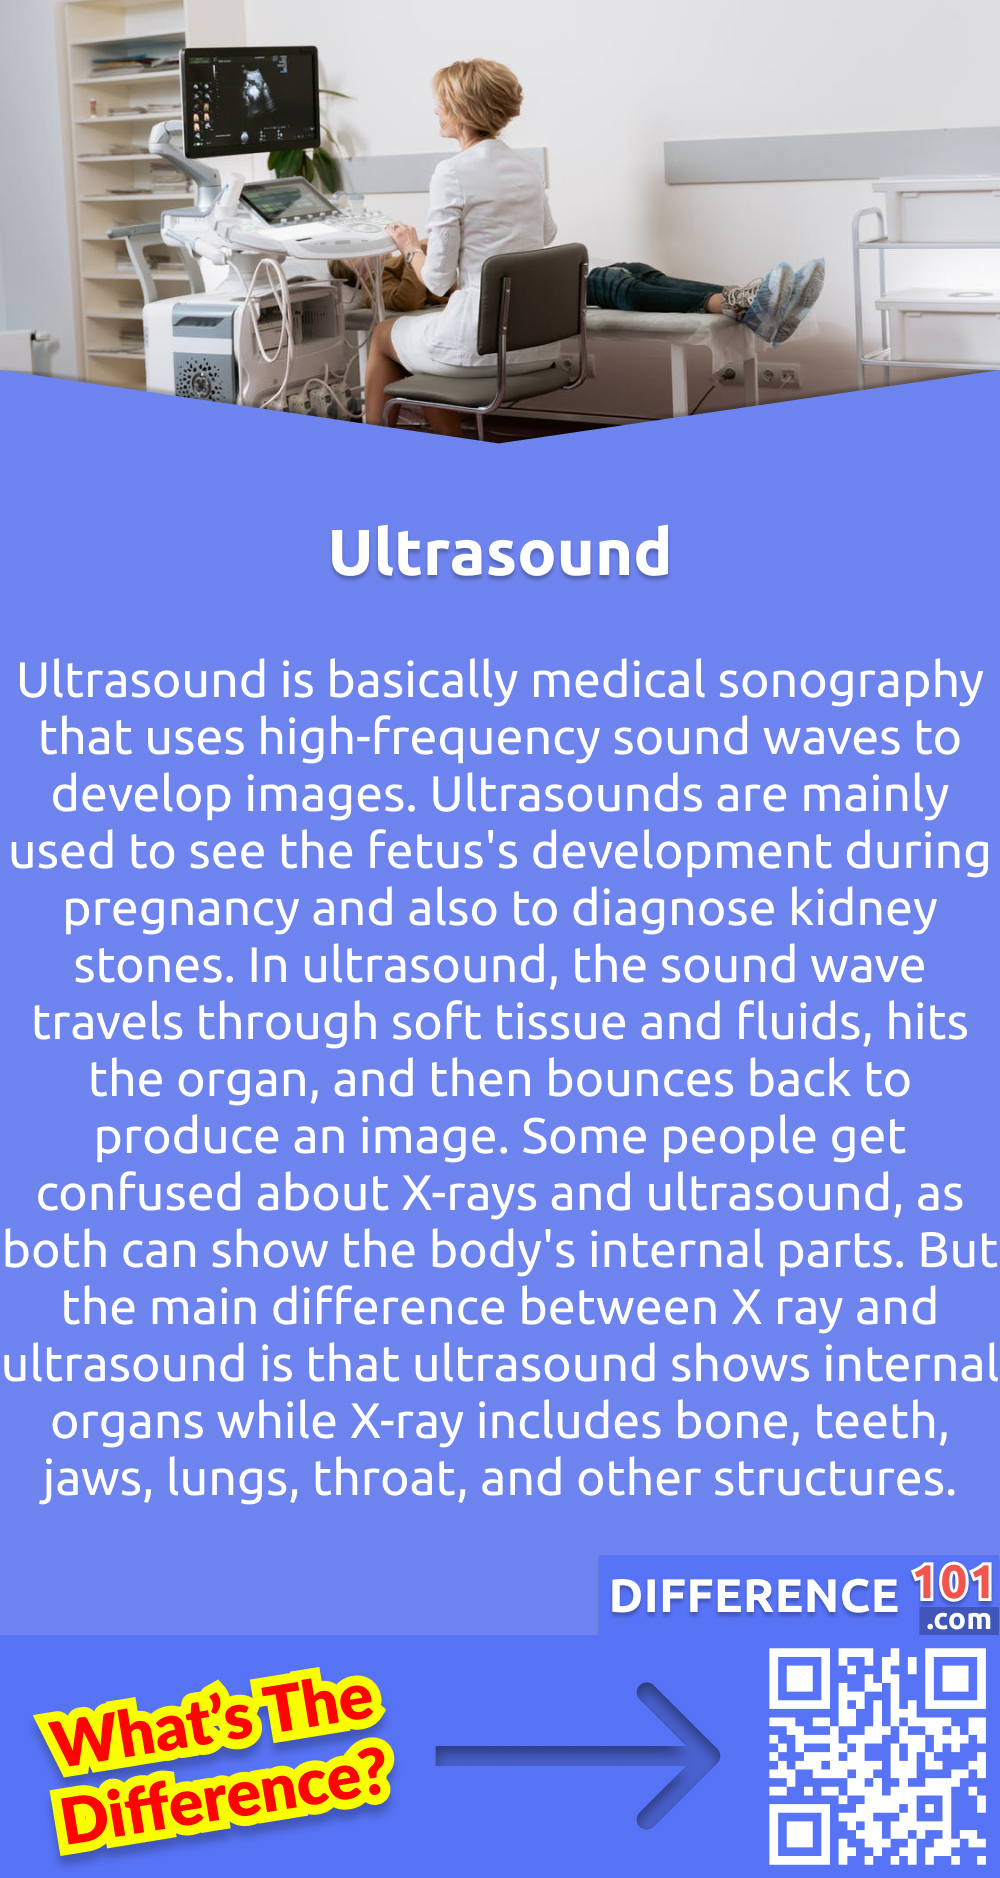 What is Ultrasound? Ultrasound is basically medical sonography that uses high-frequency sound waves to develop images. Ultrasounds are mainly used to see the fetus's development during pregnancy and also to diagnose kidney stones. In ultrasound, the sound wave travels through soft tissue and fluids, hits the organ, and then bounces back to produce an image. Some people get confused about X-rays and ultrasound, as both can show the body's internal parts. But the main difference between X ray and ultrasound is that ultrasound shows internal organs while X-ray includes bone, teeth, jaws, lungs, throat, and other structures.